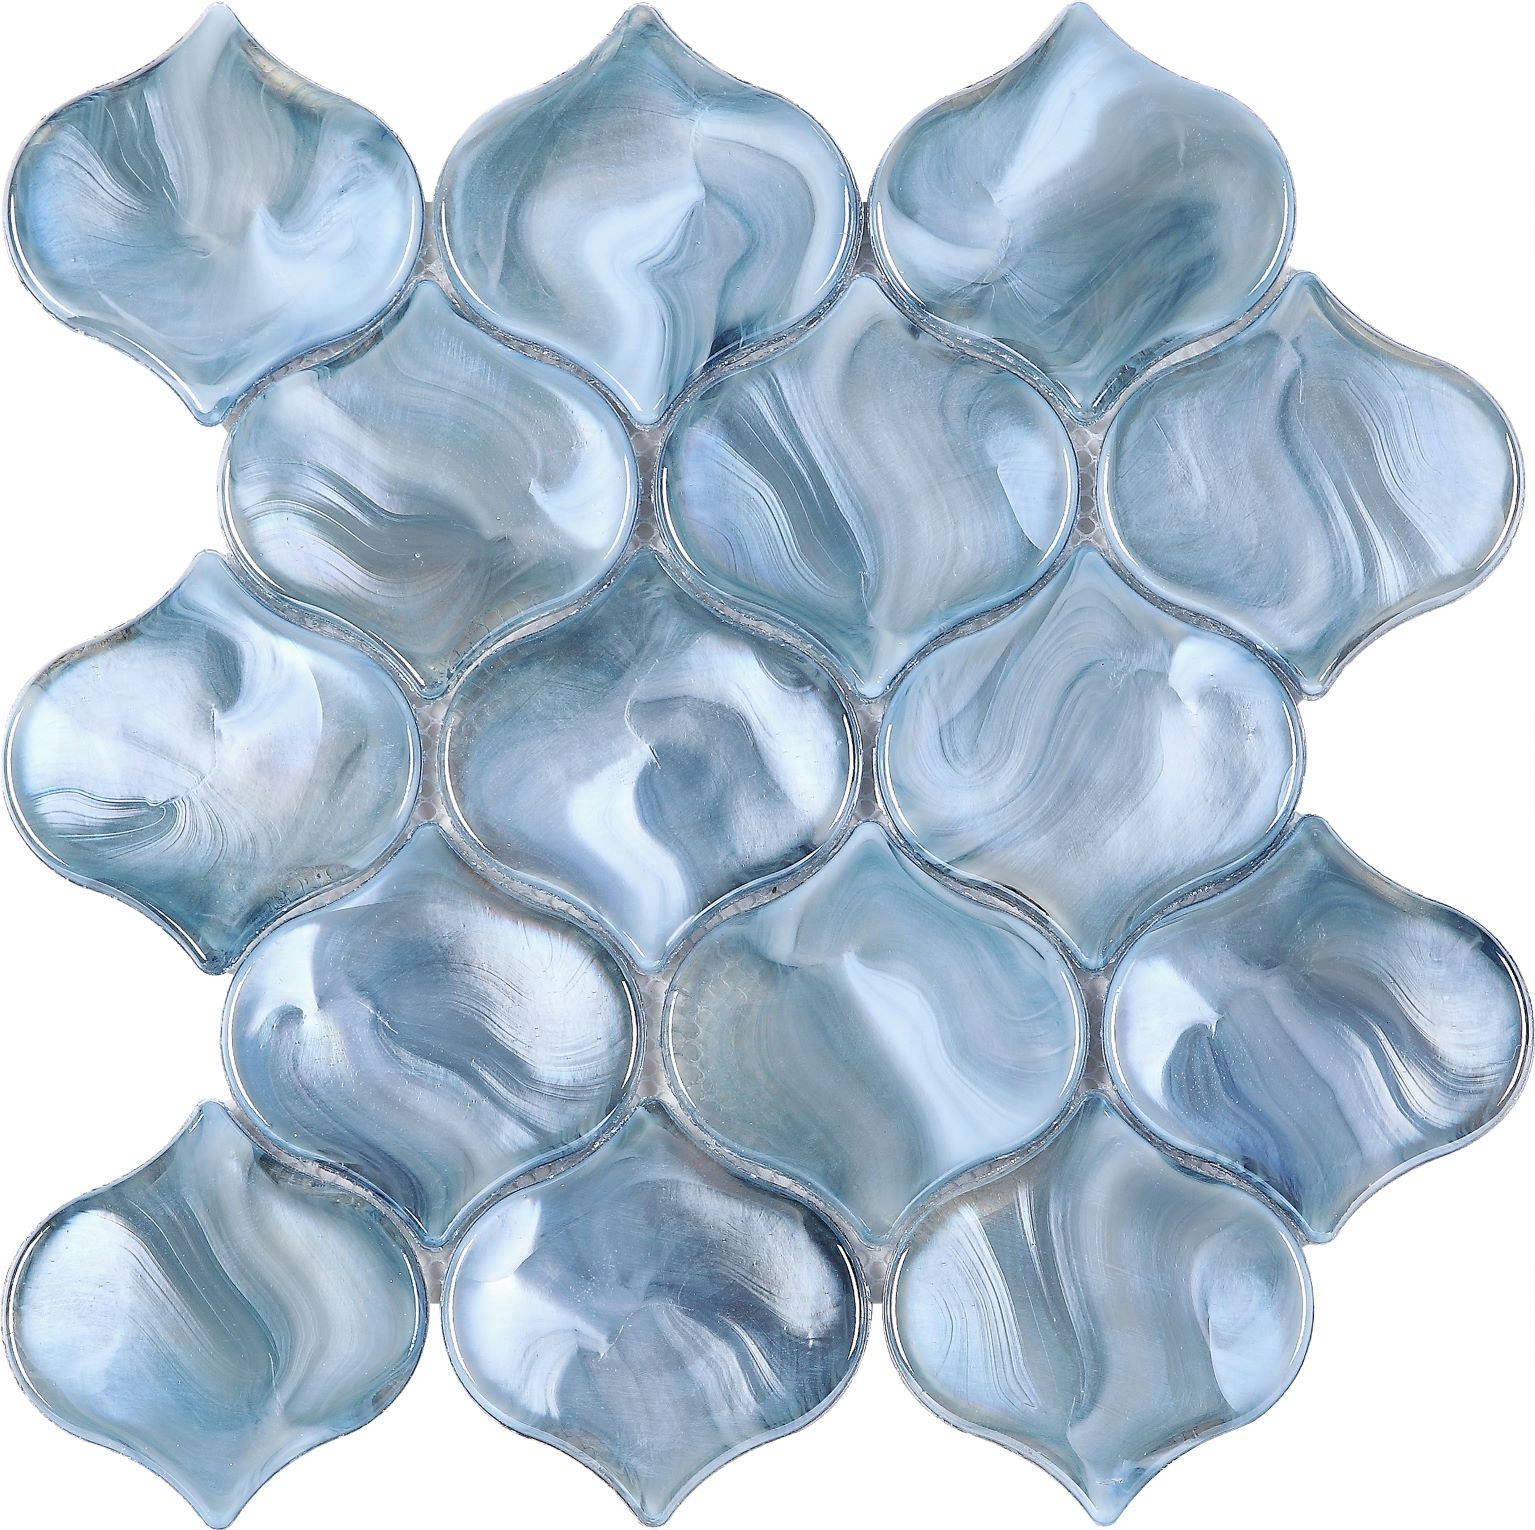 WS6-06-G | Stones And More | Finest selection of Mosaics, Glass, Tile and Stone